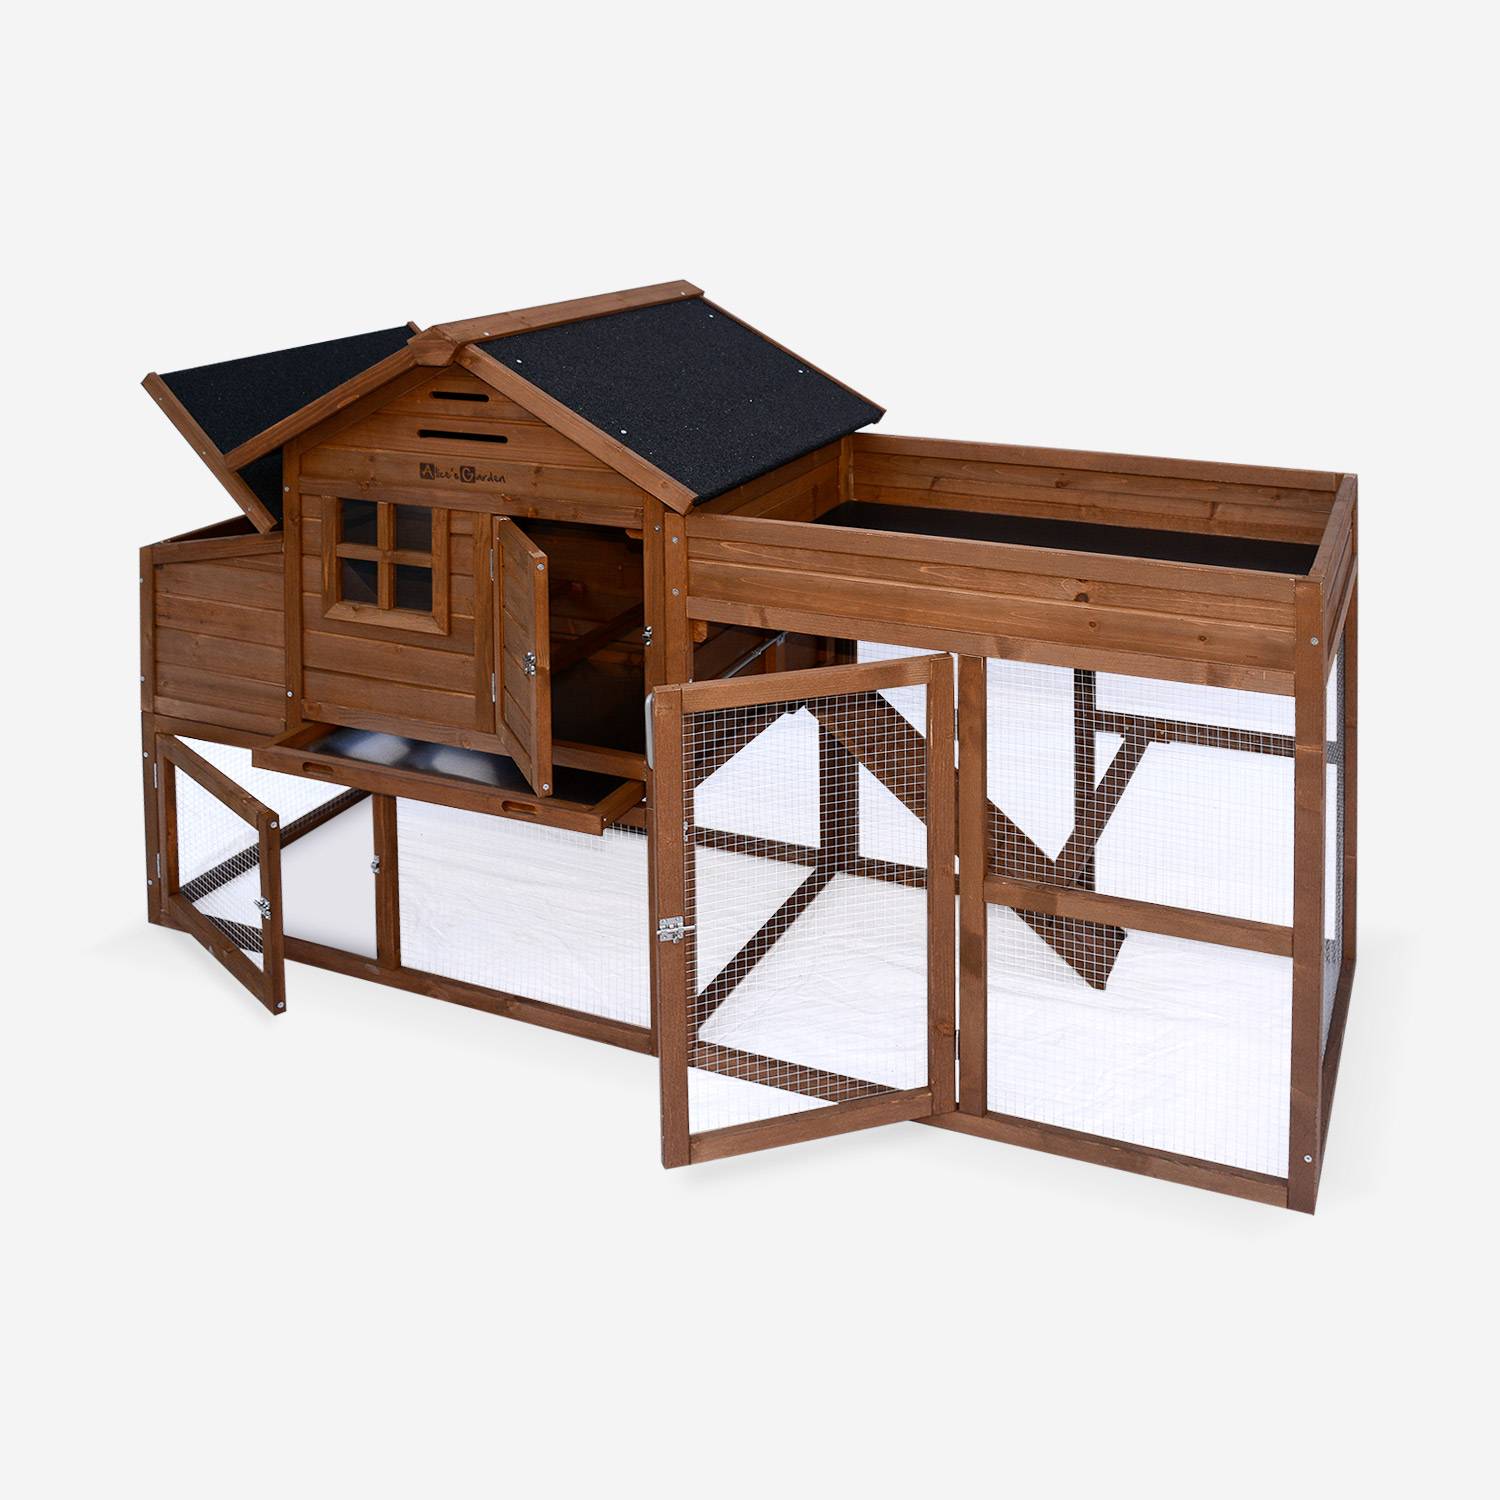 Wooden chicken coop - for 3 chickens, with enclosure and integrated planter - Campine - Wood colour,sweeek,Photo2